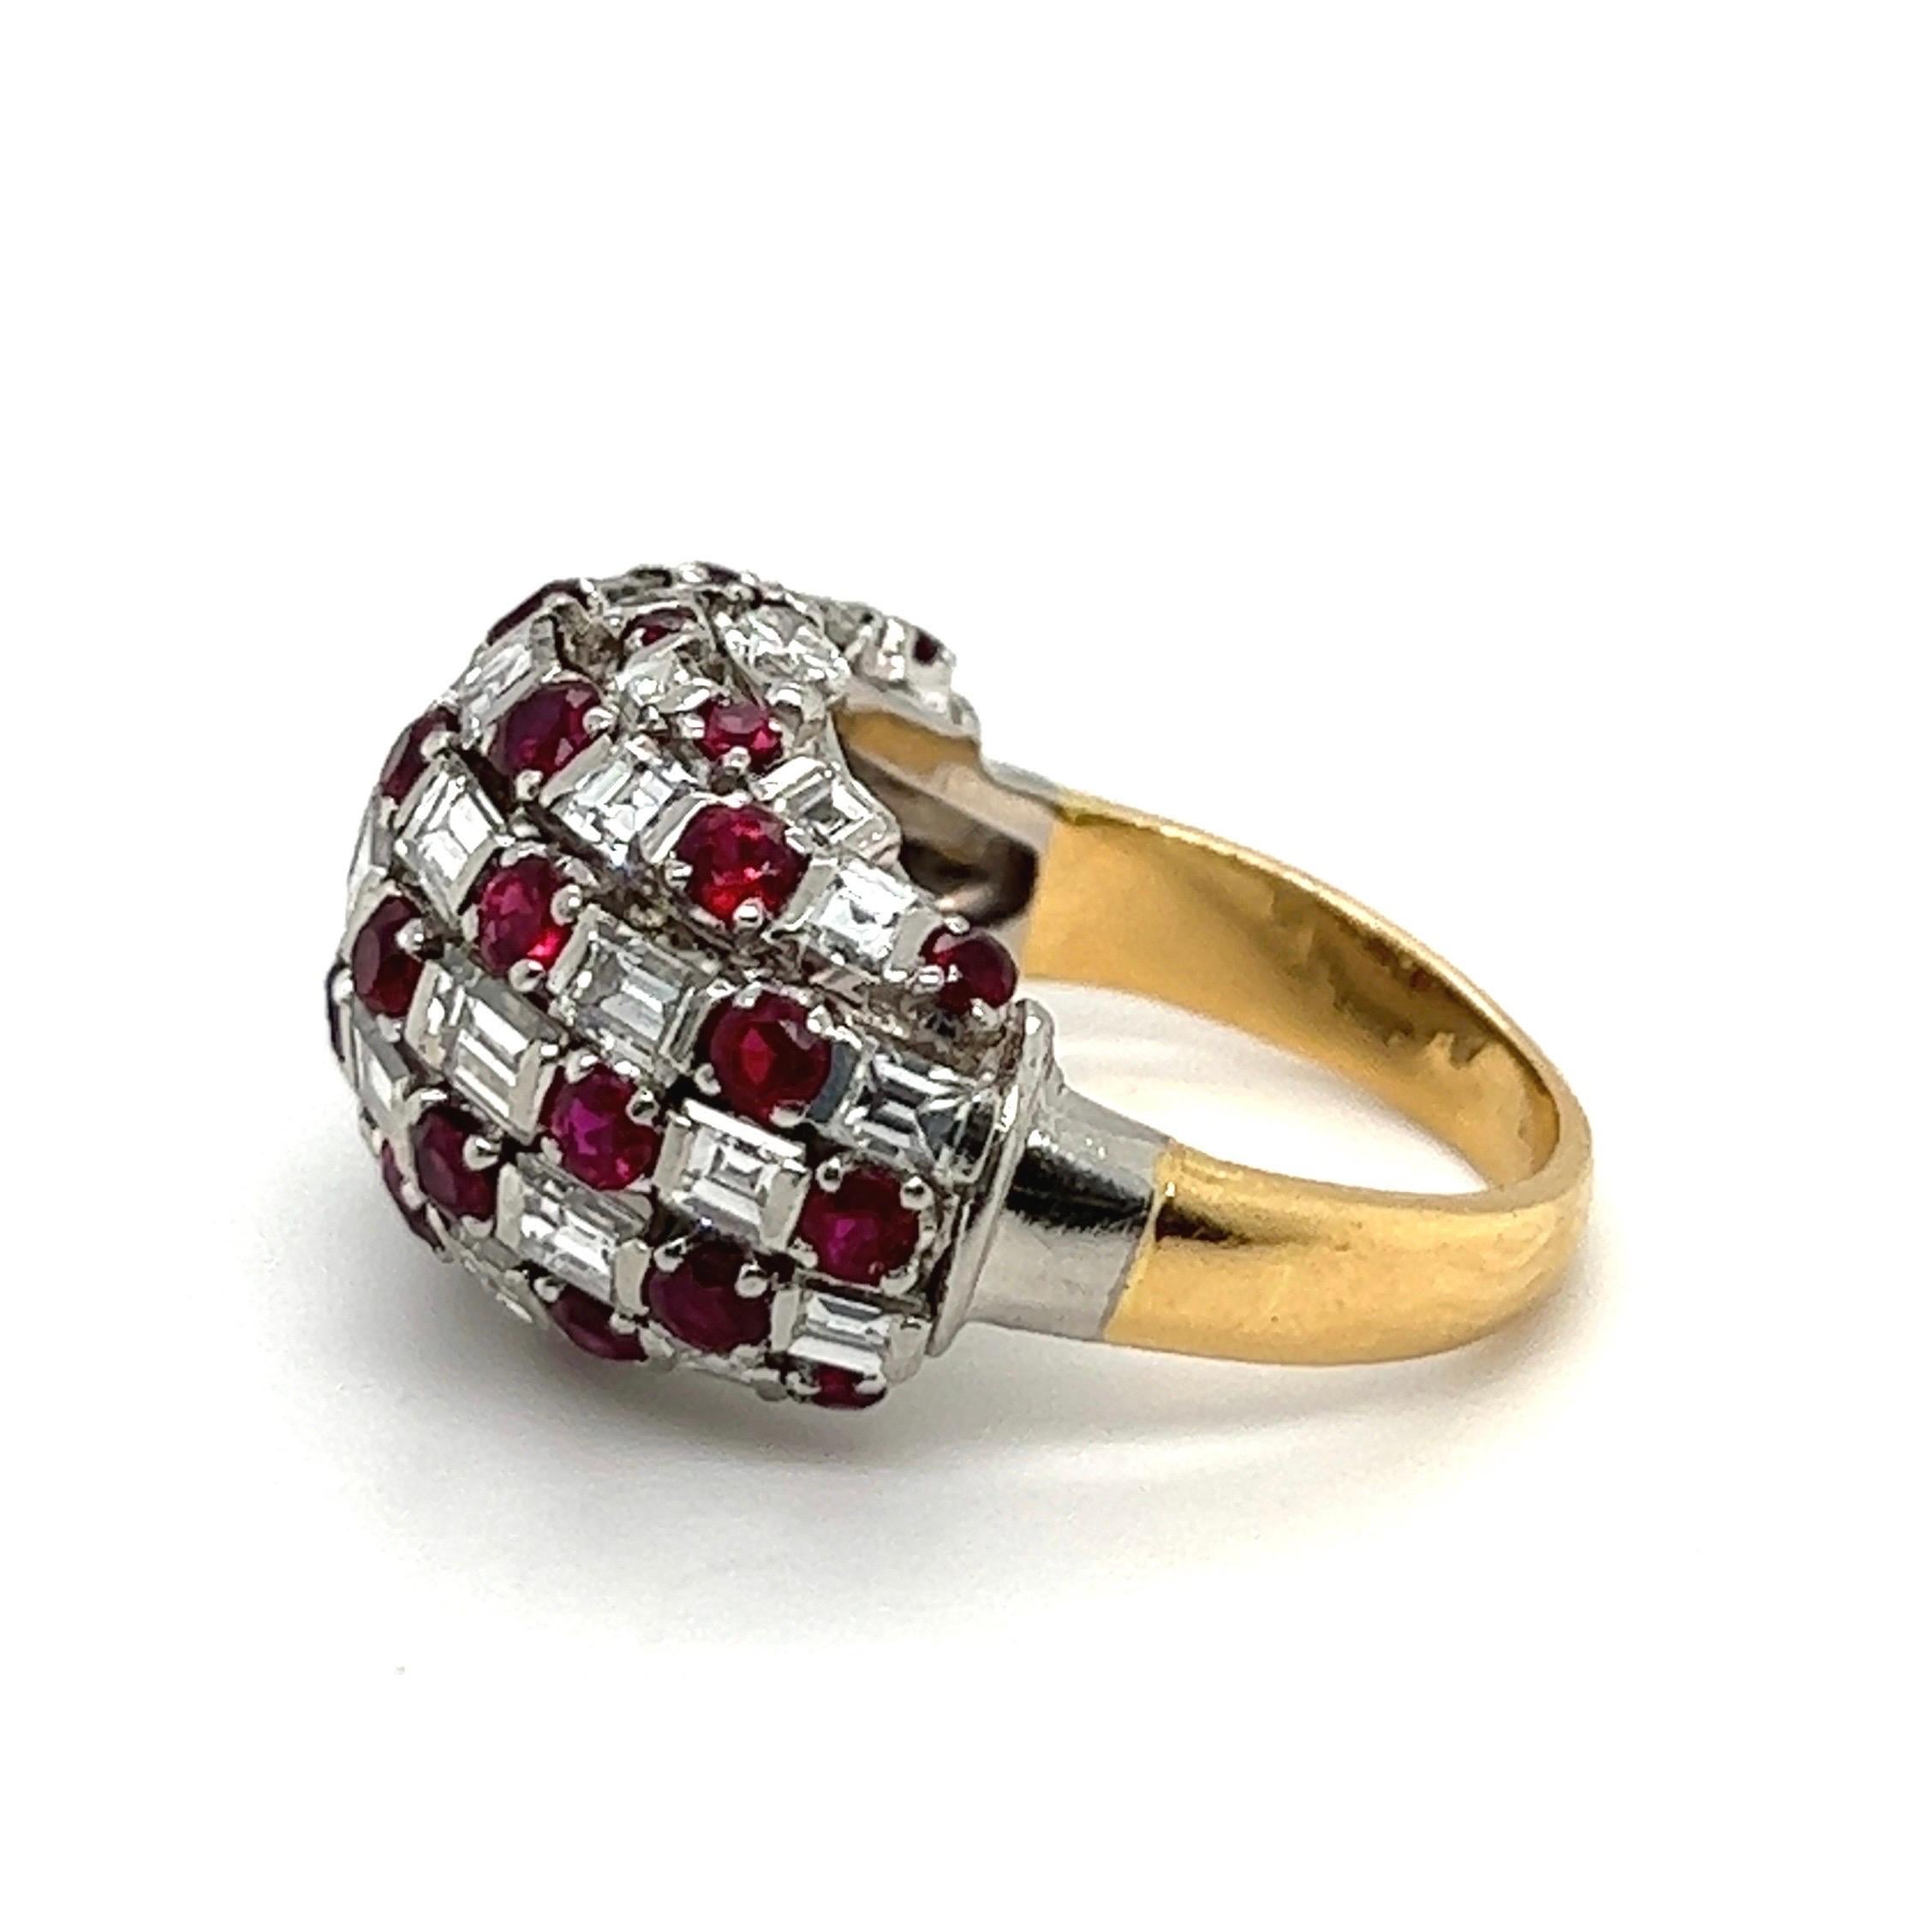 Ravishing 18 karat yellow gold, platinum, diamond and ruby cocktail ring from the 1950s.
Of bombé design, crafted in 18 karat yellow gold and platinum, the dome featuring a checkerboard pattern consisting of round faceted rubies totalling circa 1.6